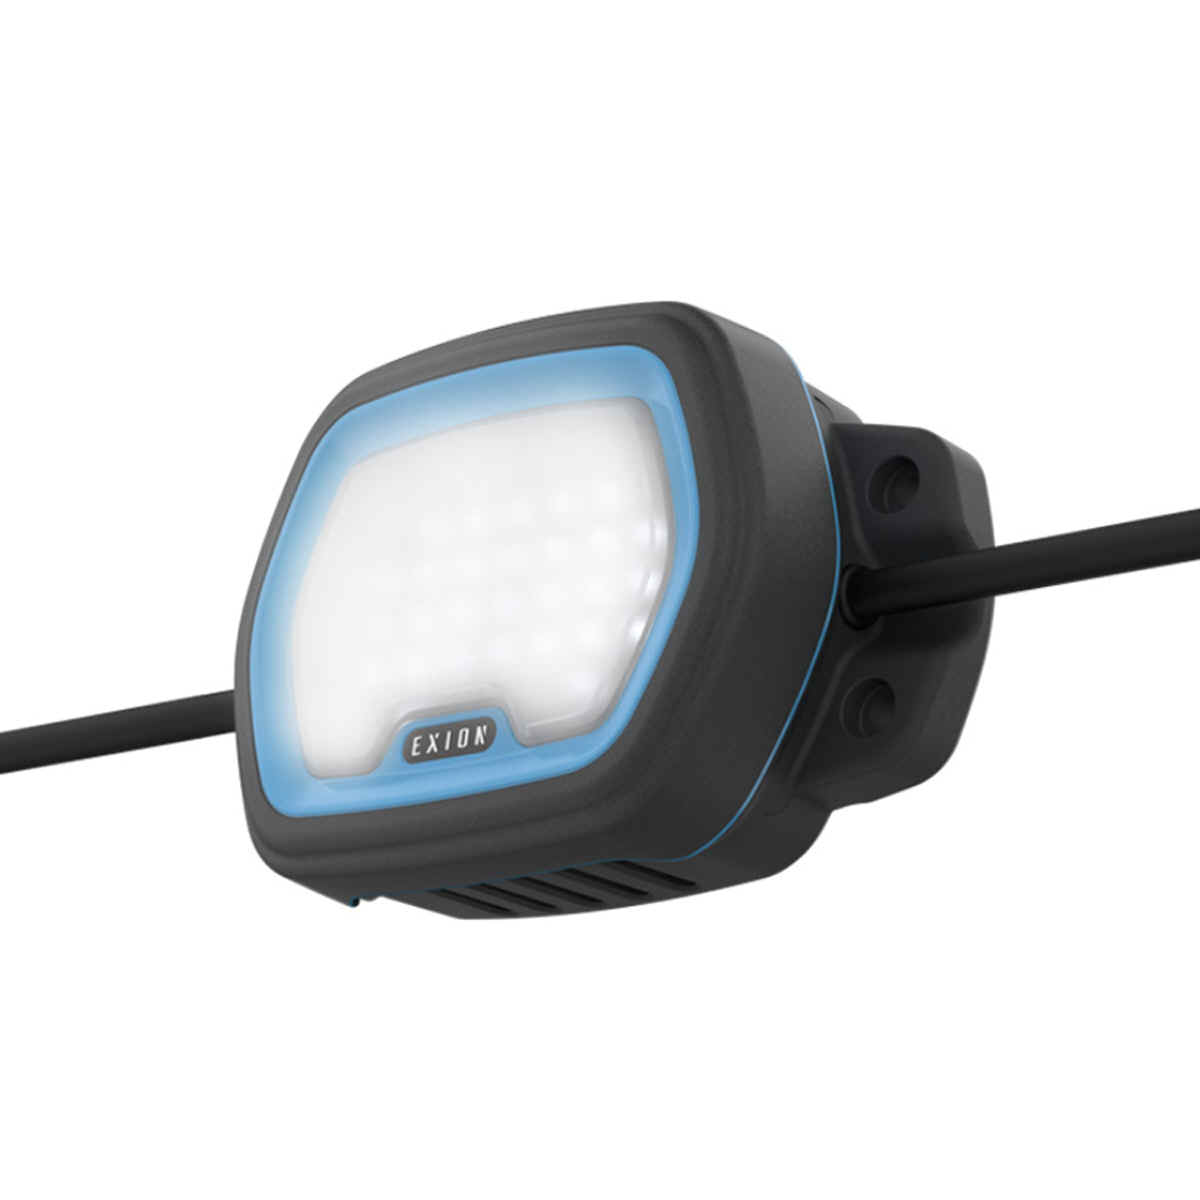 The E3 lighting range can be mounted securely onto a wall or large flat surface by screwing through the flange features to create semipermanent lighting